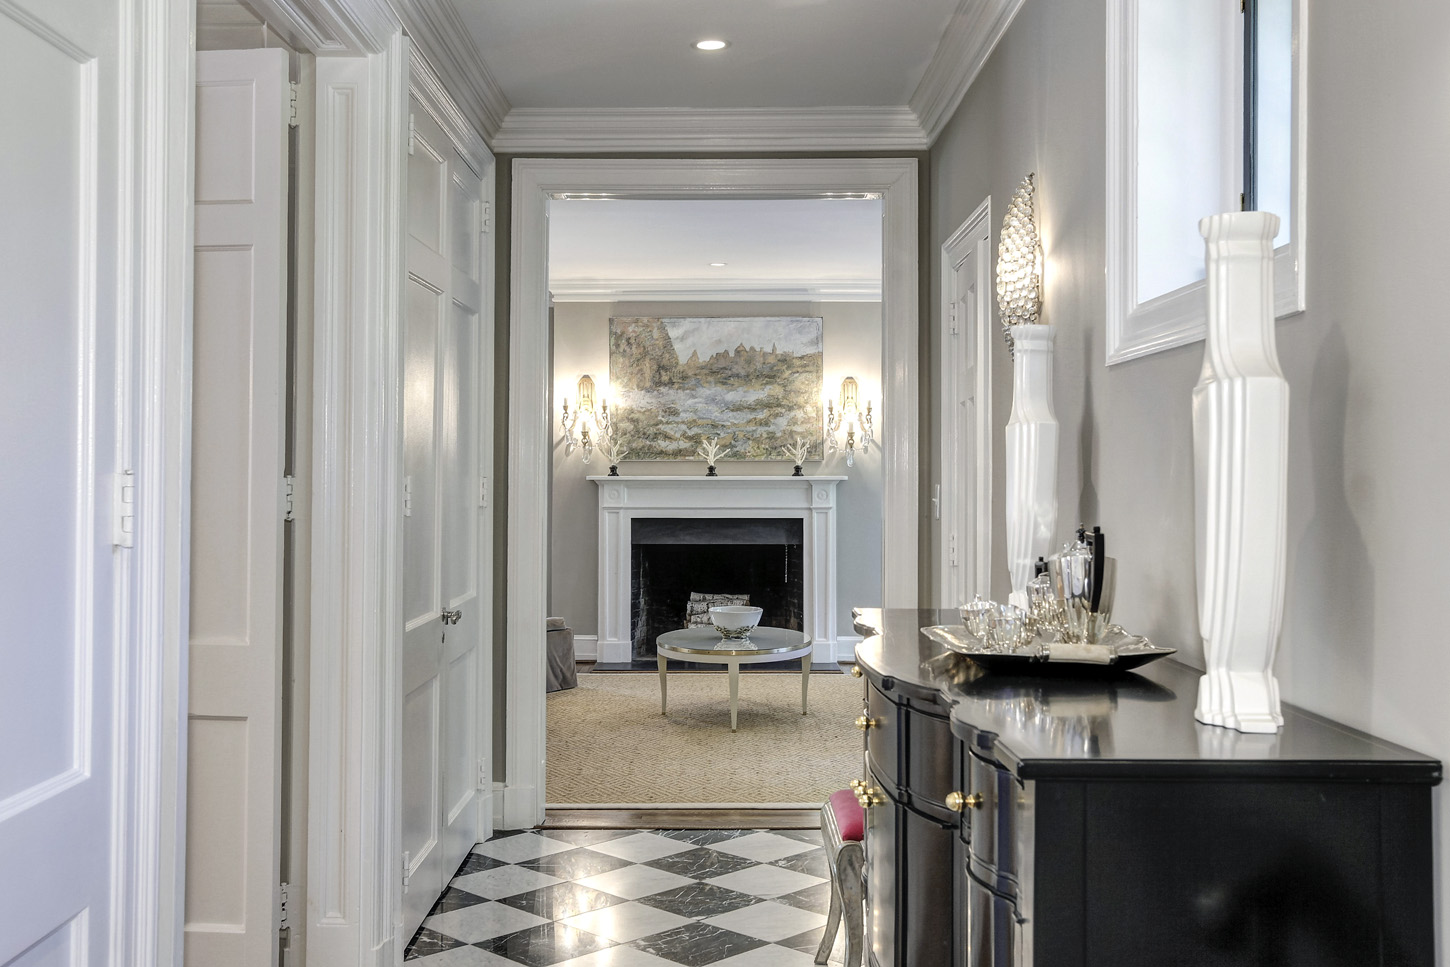 A view of the hallway and living room of the Obamas' new house, in the Kalorama area of Northwest D.C. (Courtesy McFadden Group)